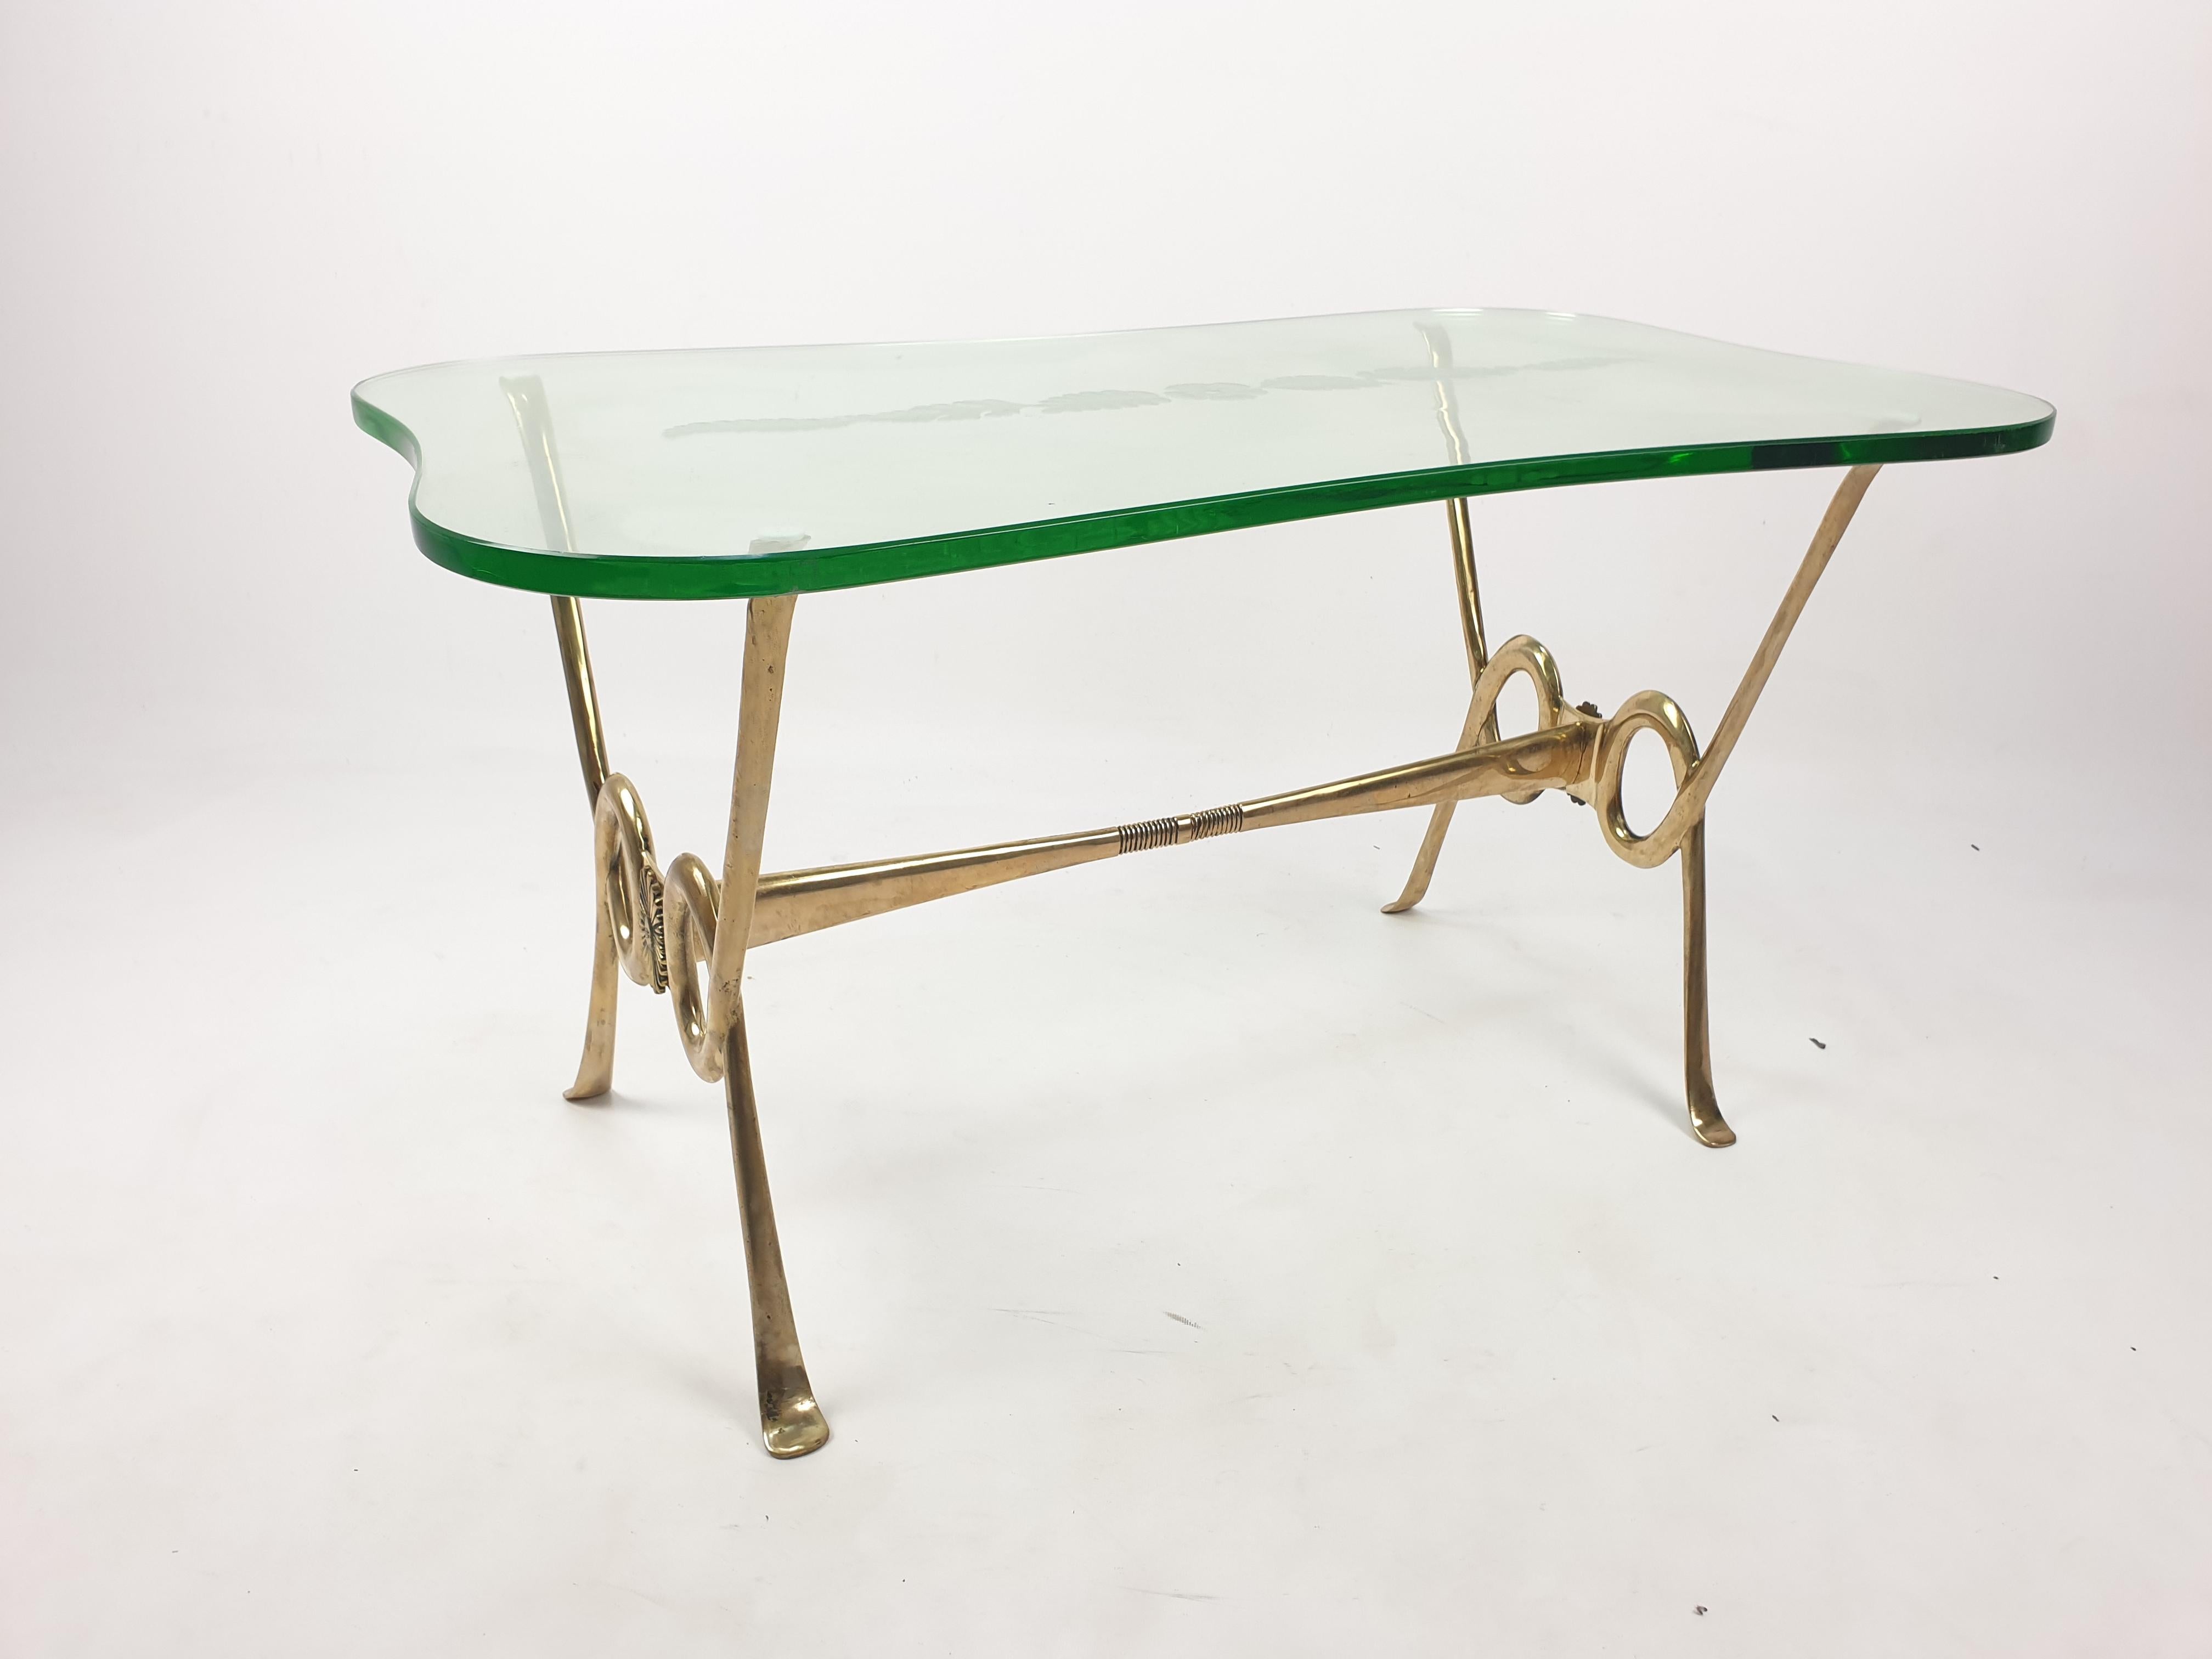 Beautiful and very particular coffee table made of a brass base and a wonderful etched glass plate. The bright and thick glass is wonderful made with lovely curves. Look at the pictures for the amazing etched flowers. This is a stunning piece!